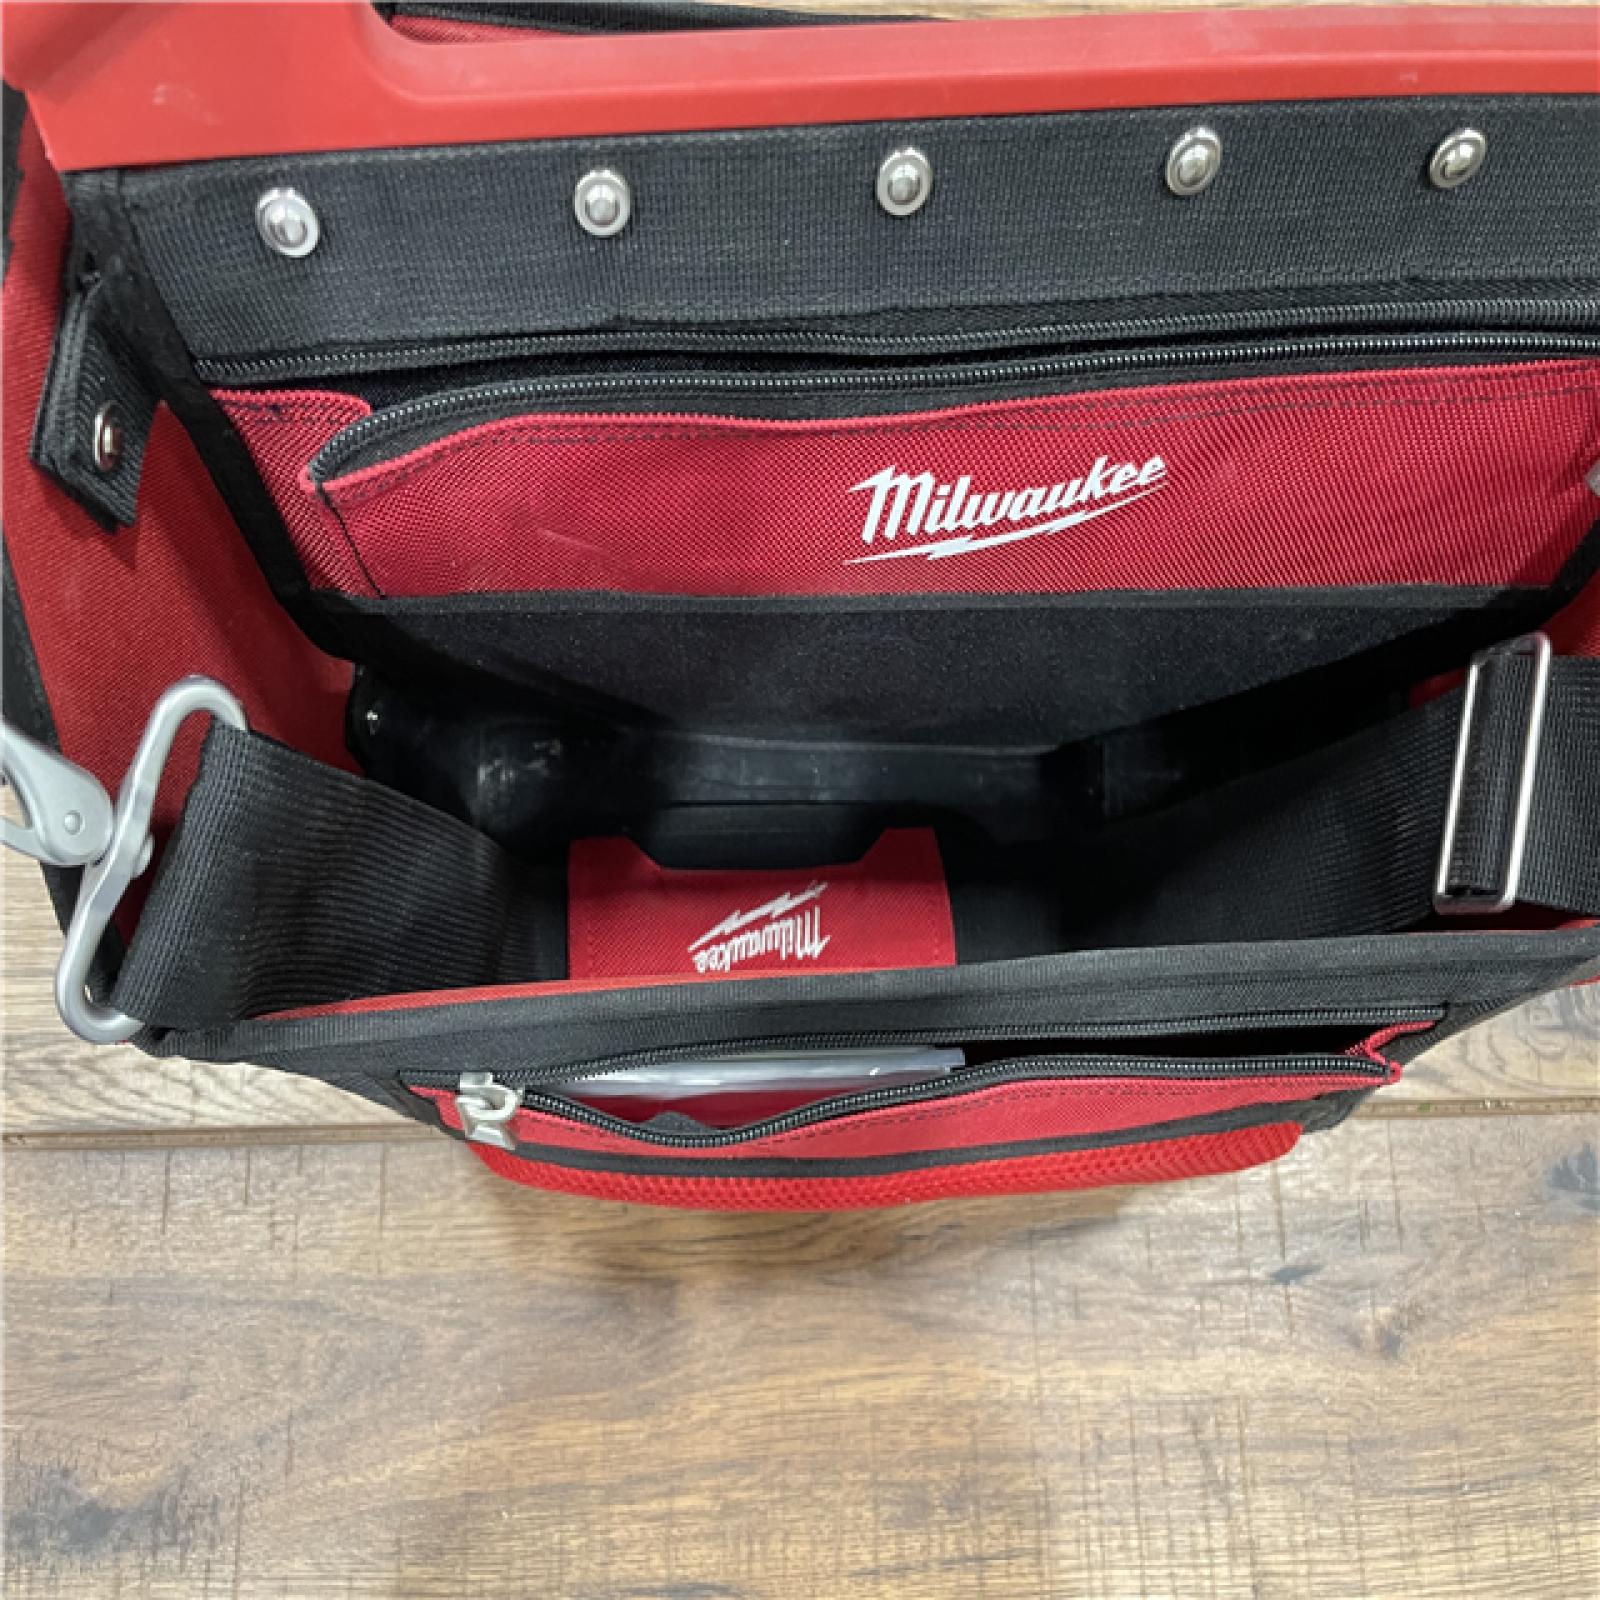 AS-IS Milwaukee 48-22-8315 15 PACKOUT Tote